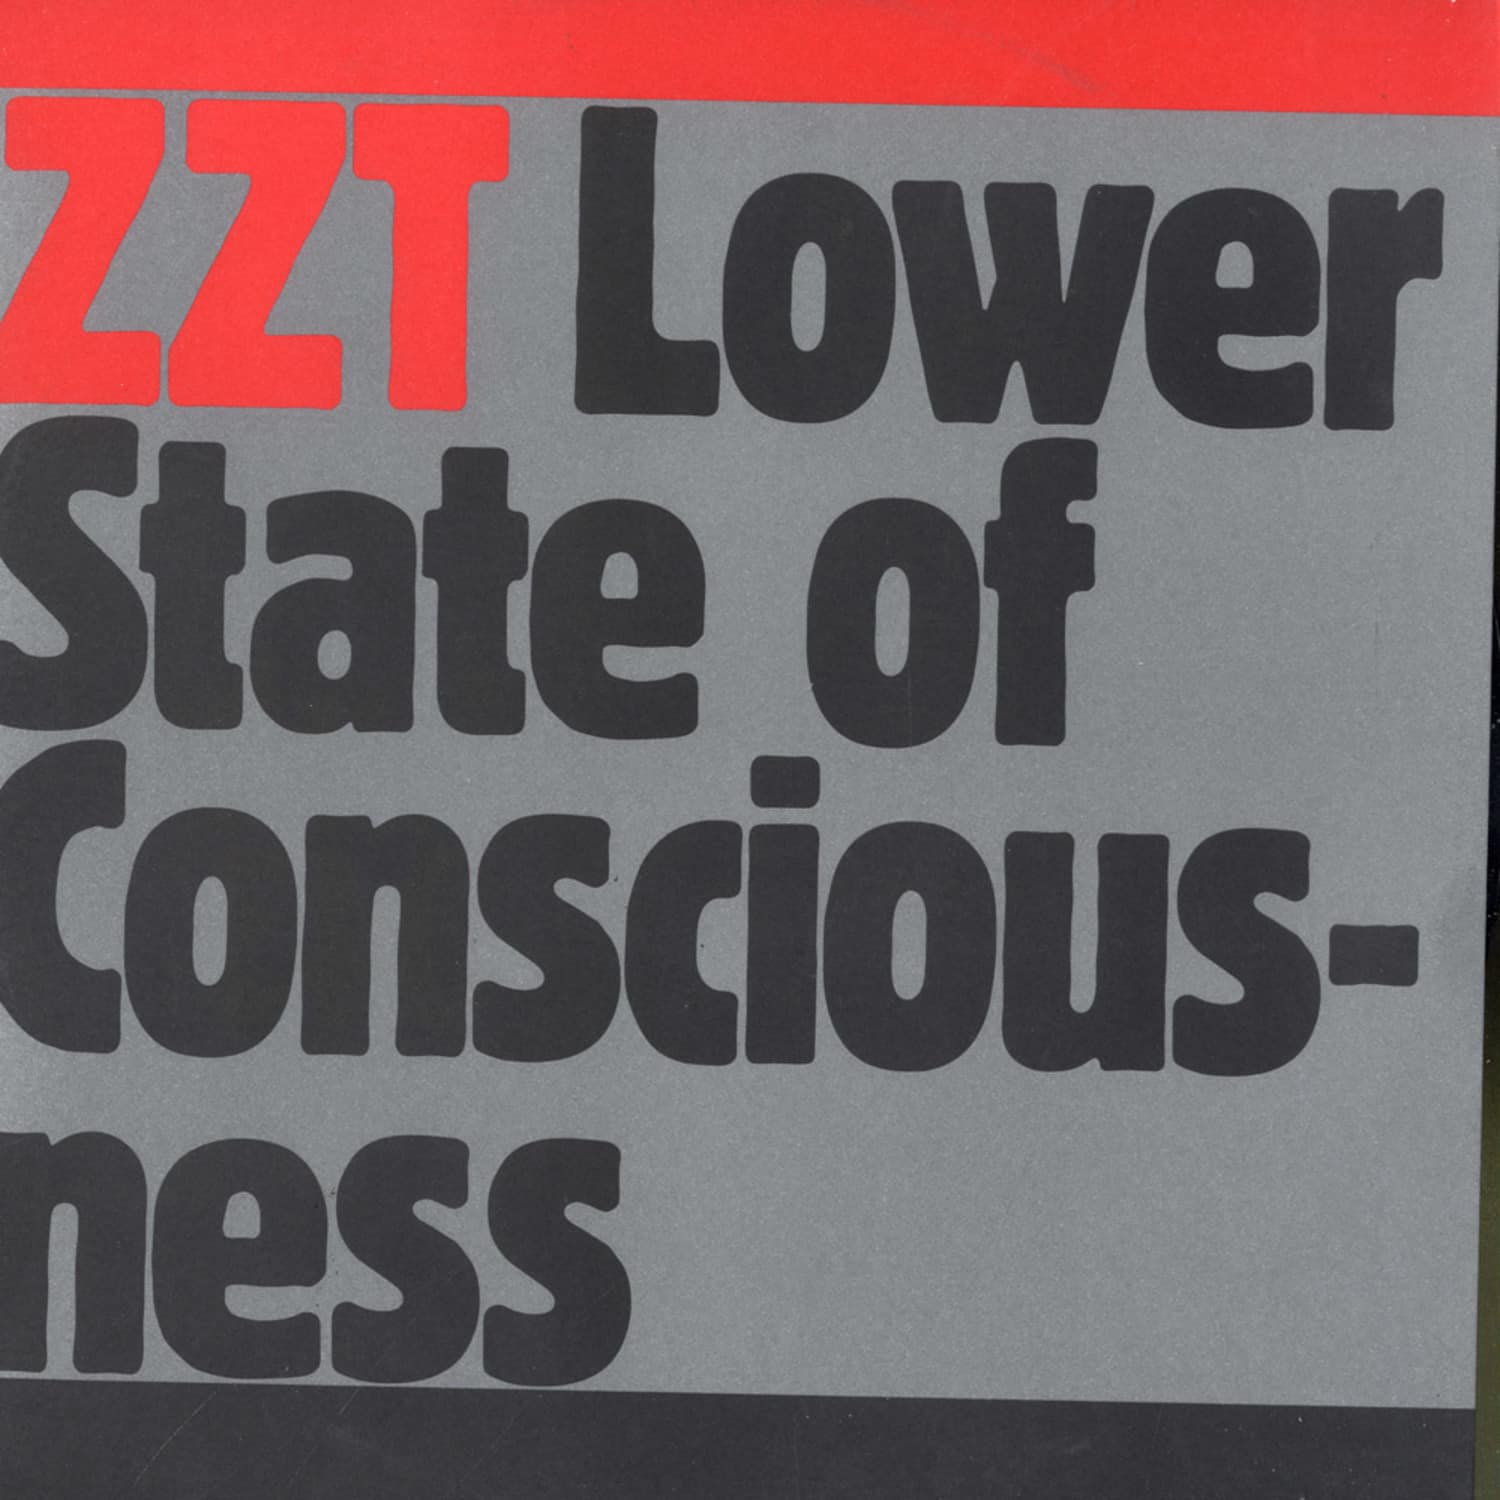 ZZT  - LOWER STATE OF CONSCIOUSNESS